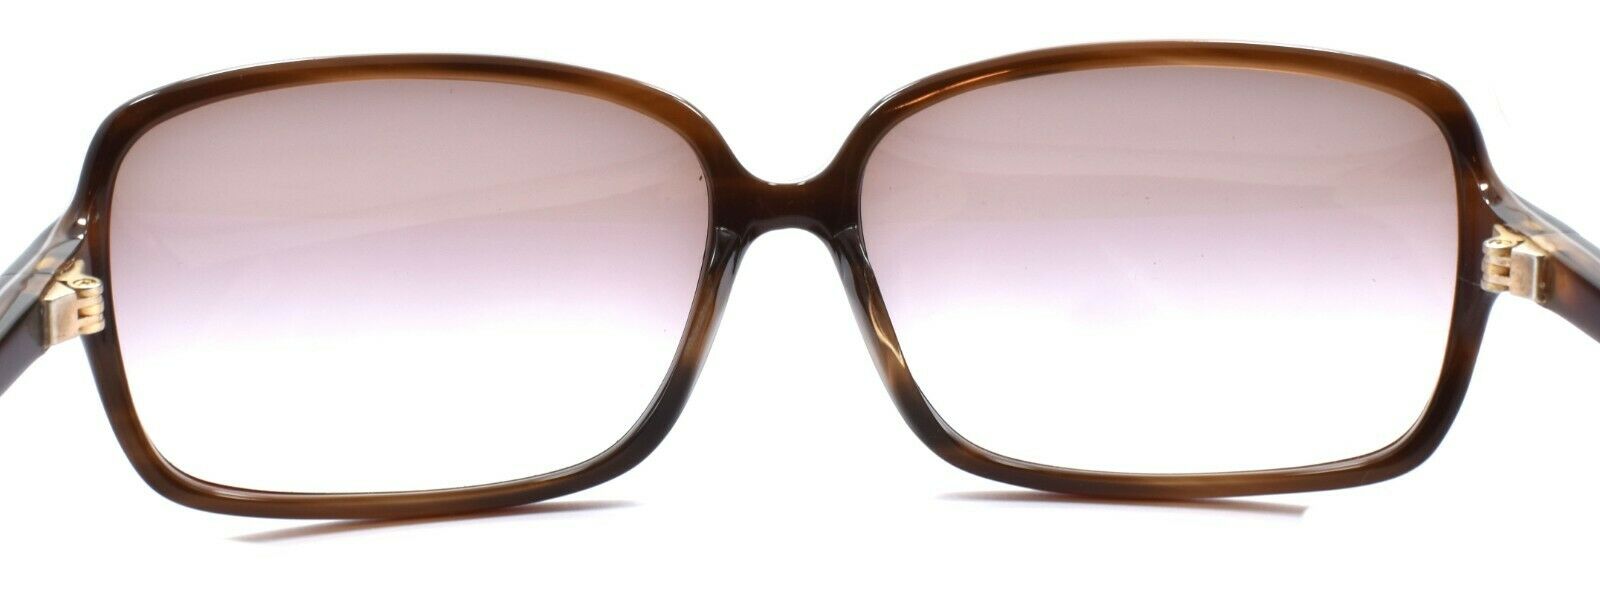 4-Oliver Peoples Bacall SISYC Women's Sunglasses Sienna Sycamore / Pink JAPAN-Does not apply-IKSpecs